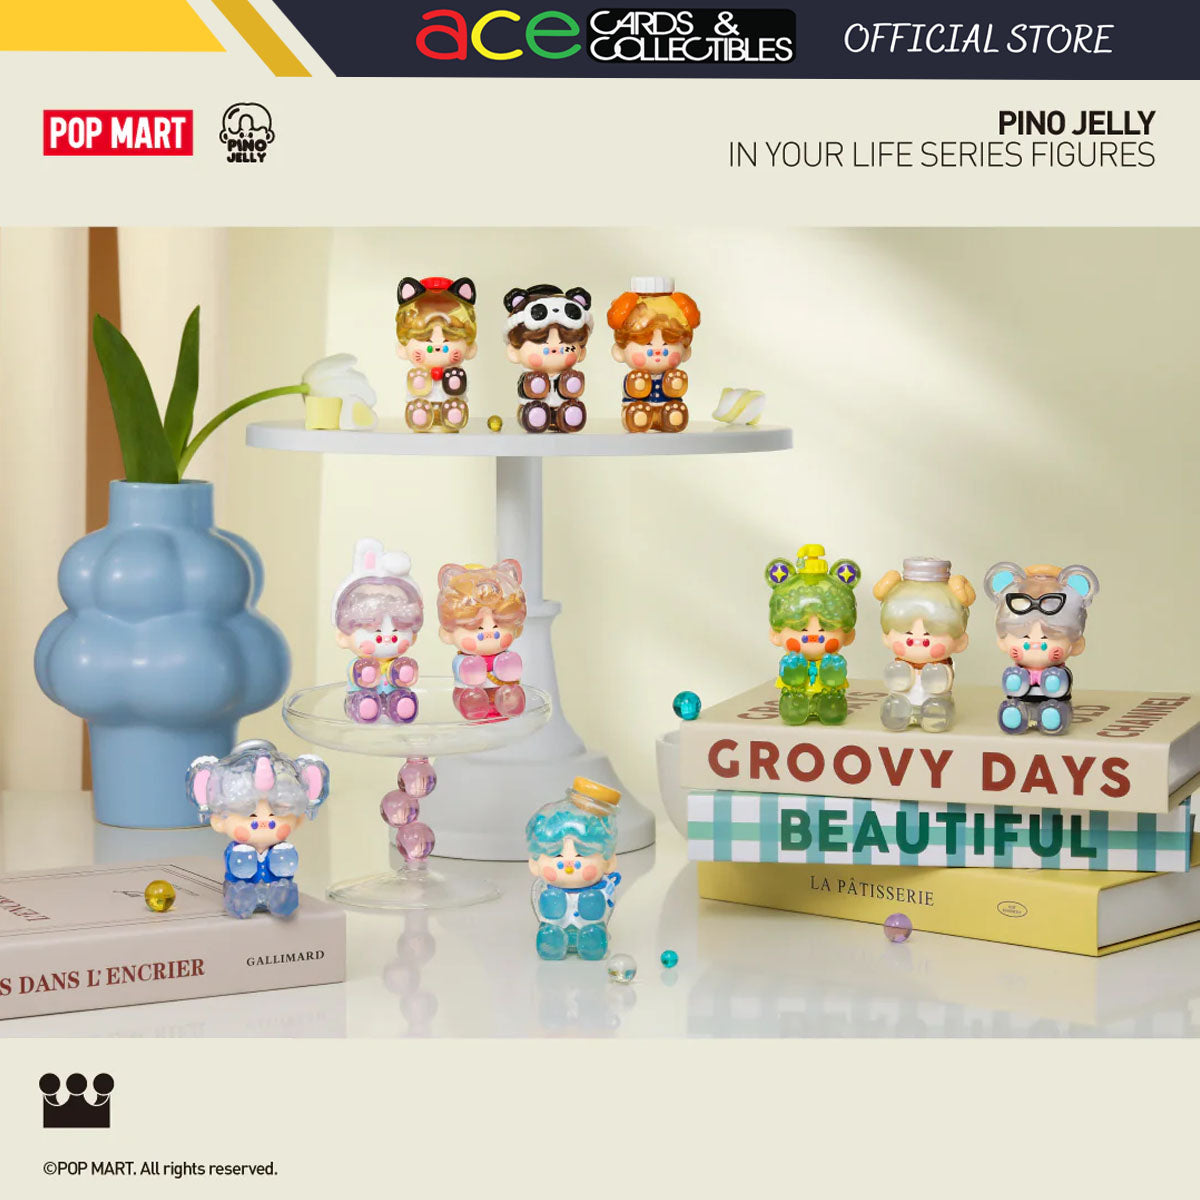 POP MART Pino Jelly In Your Life Series-Single Box (Random)-Pop Mart-Ace Cards &amp; Collectibles